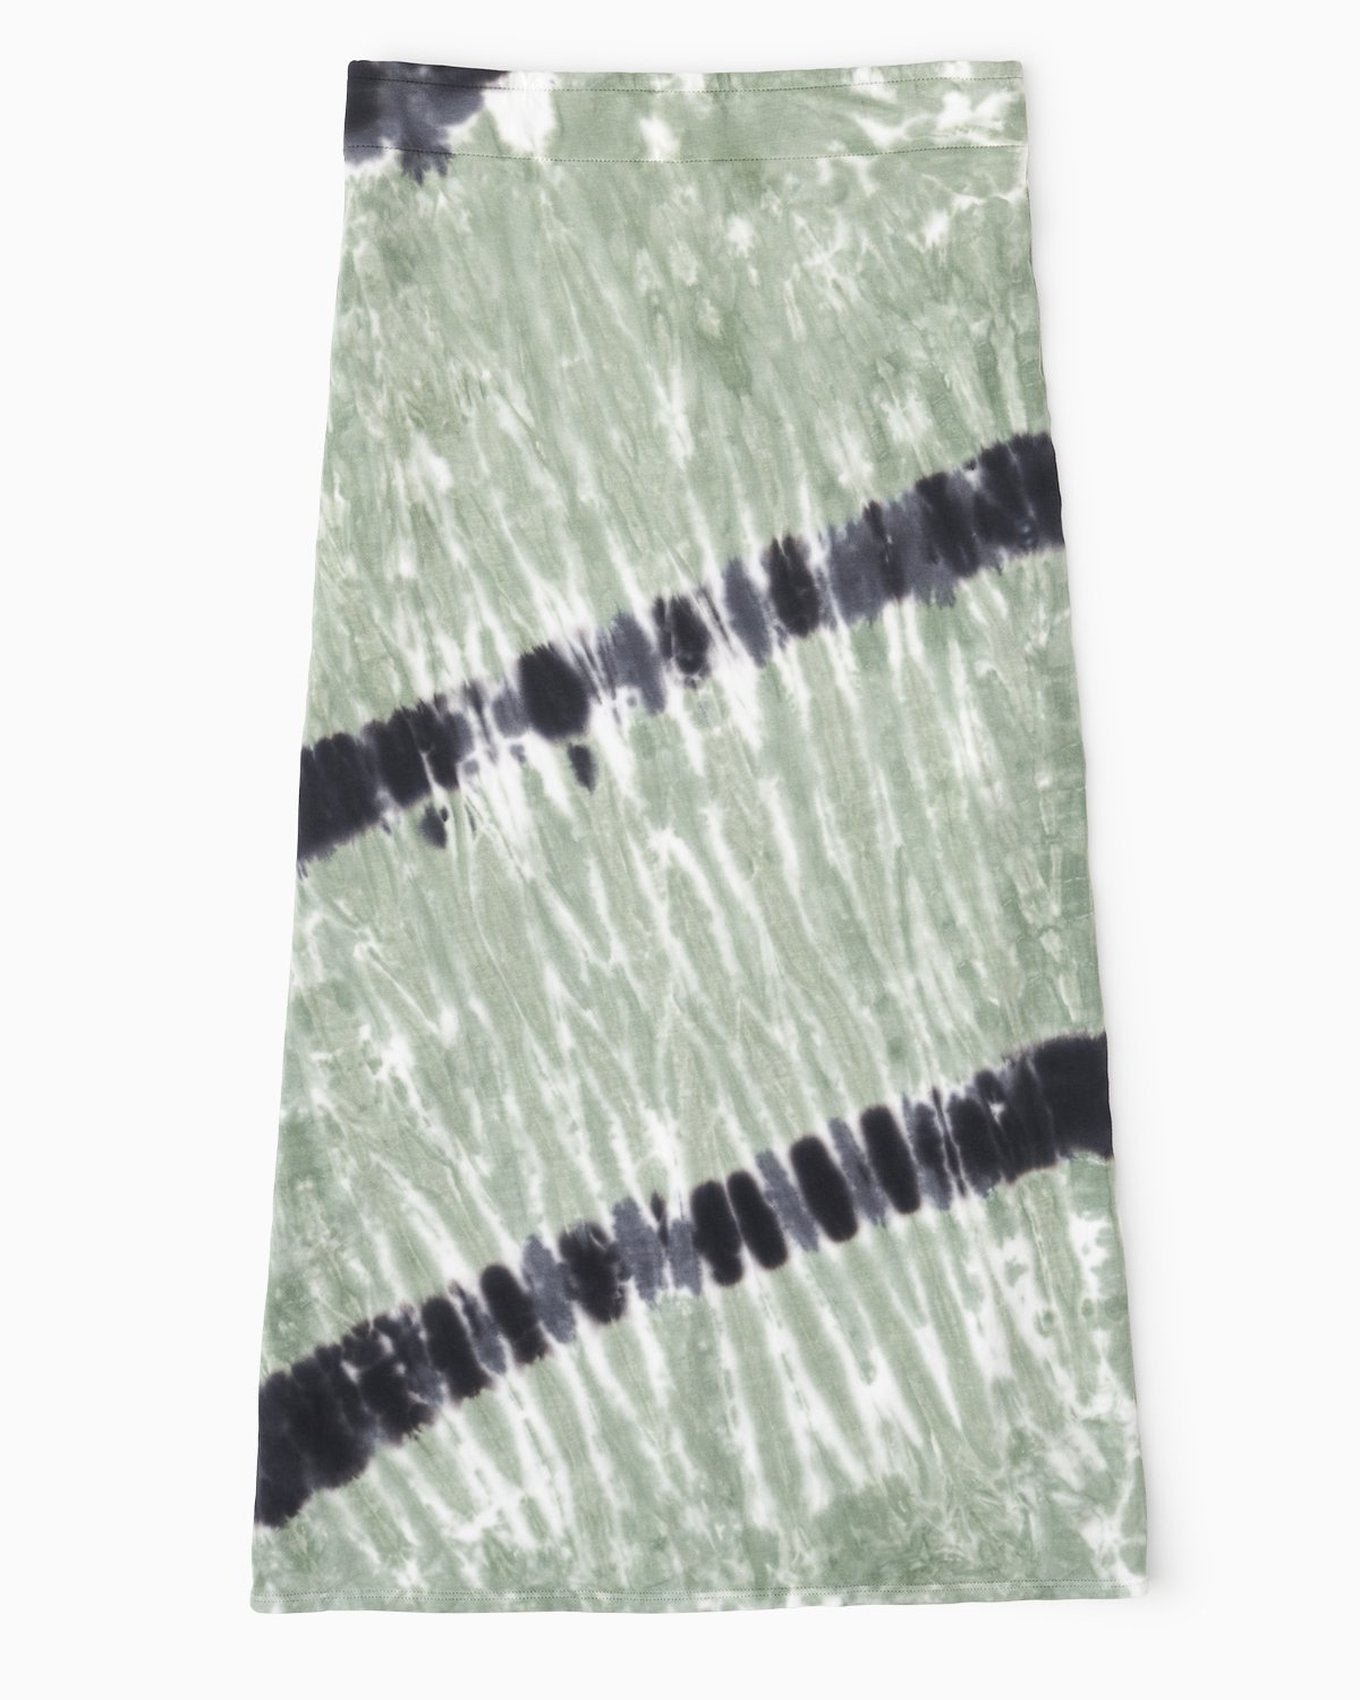 YesAnd Organic Tie Dye Midi Pencil Skirt Pencil Skirt in color Diagonal Green Tie Dye and shape pencil